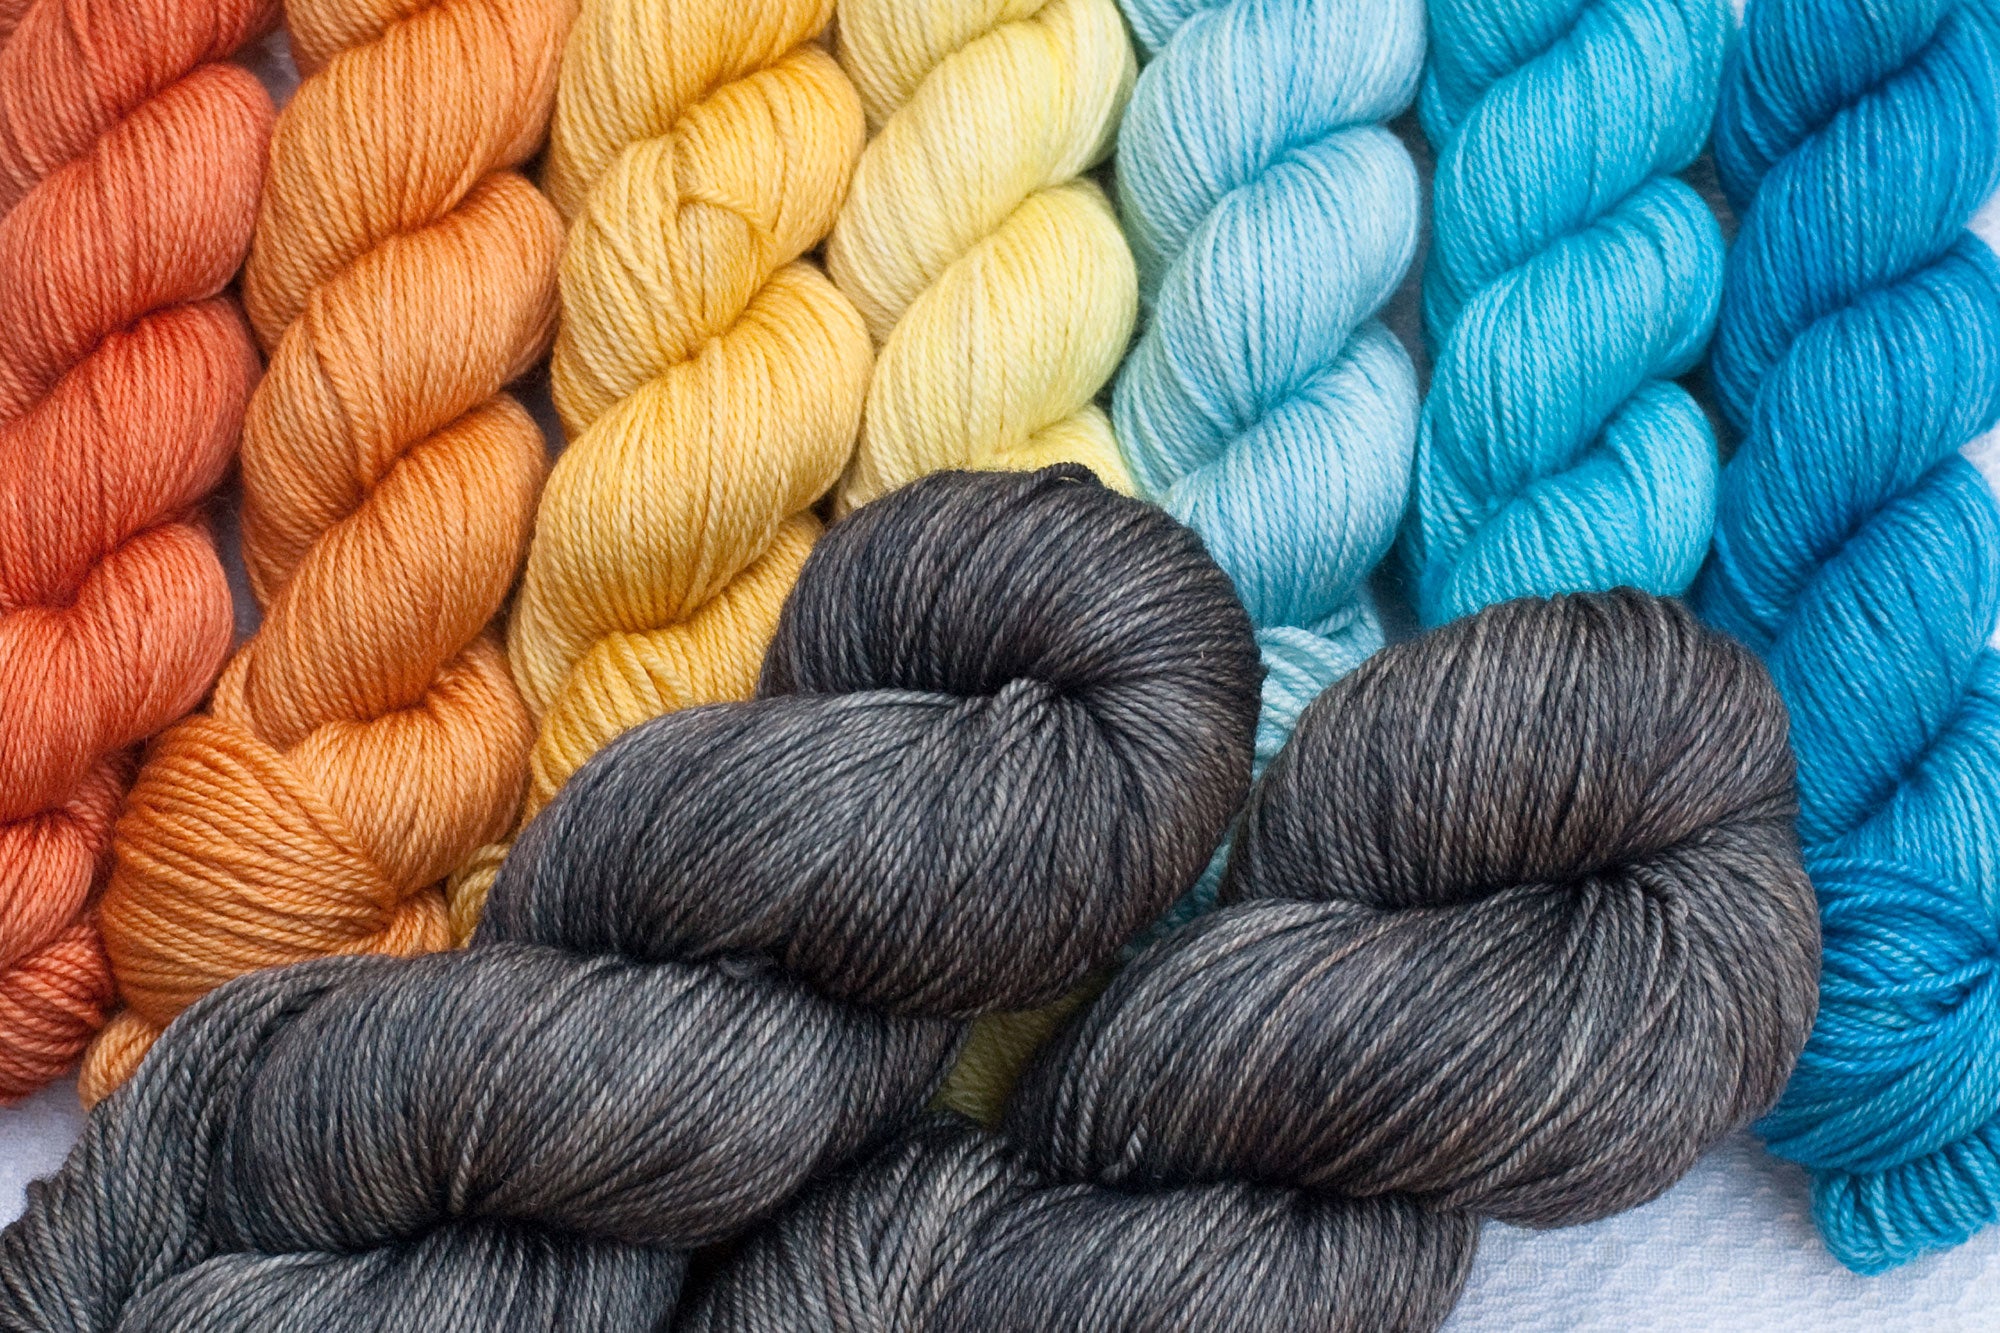 mountain musings mkal hand-dyed yarn set: gradient from orange through yellow and blue, paired with medium grey full skeins